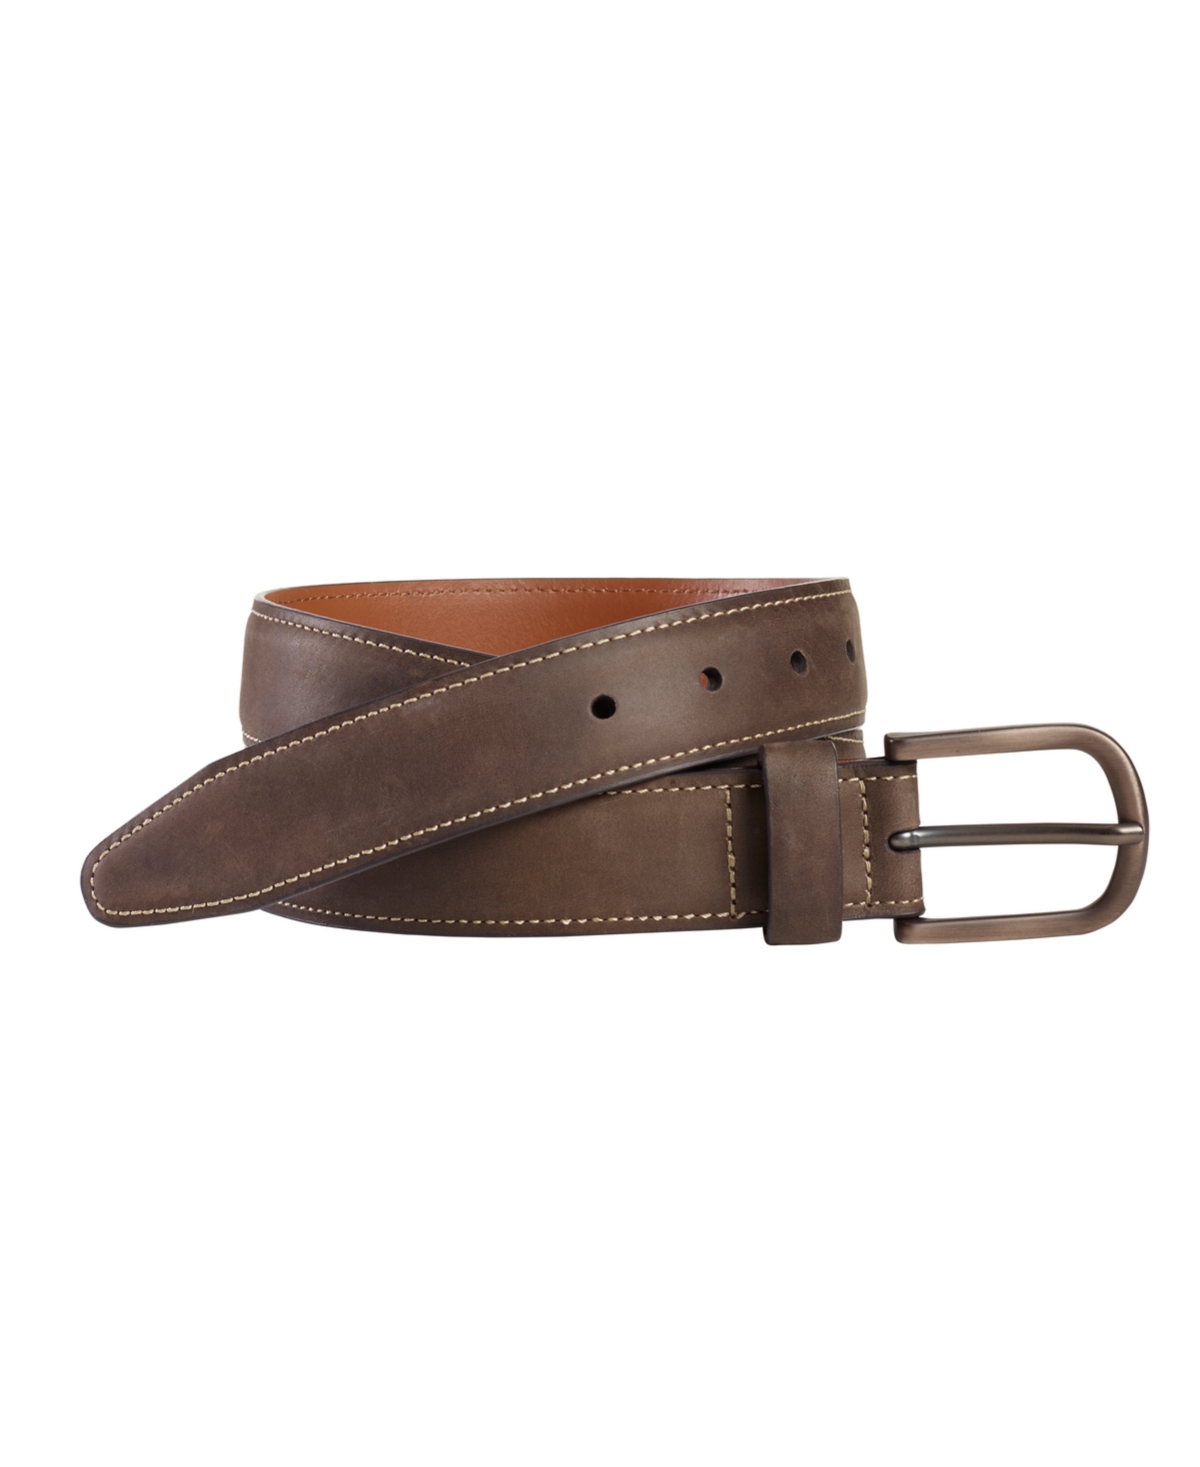 Johnston & Murphy Men's Oiled Contrast Stitched Belt In Brown Oiled Leather